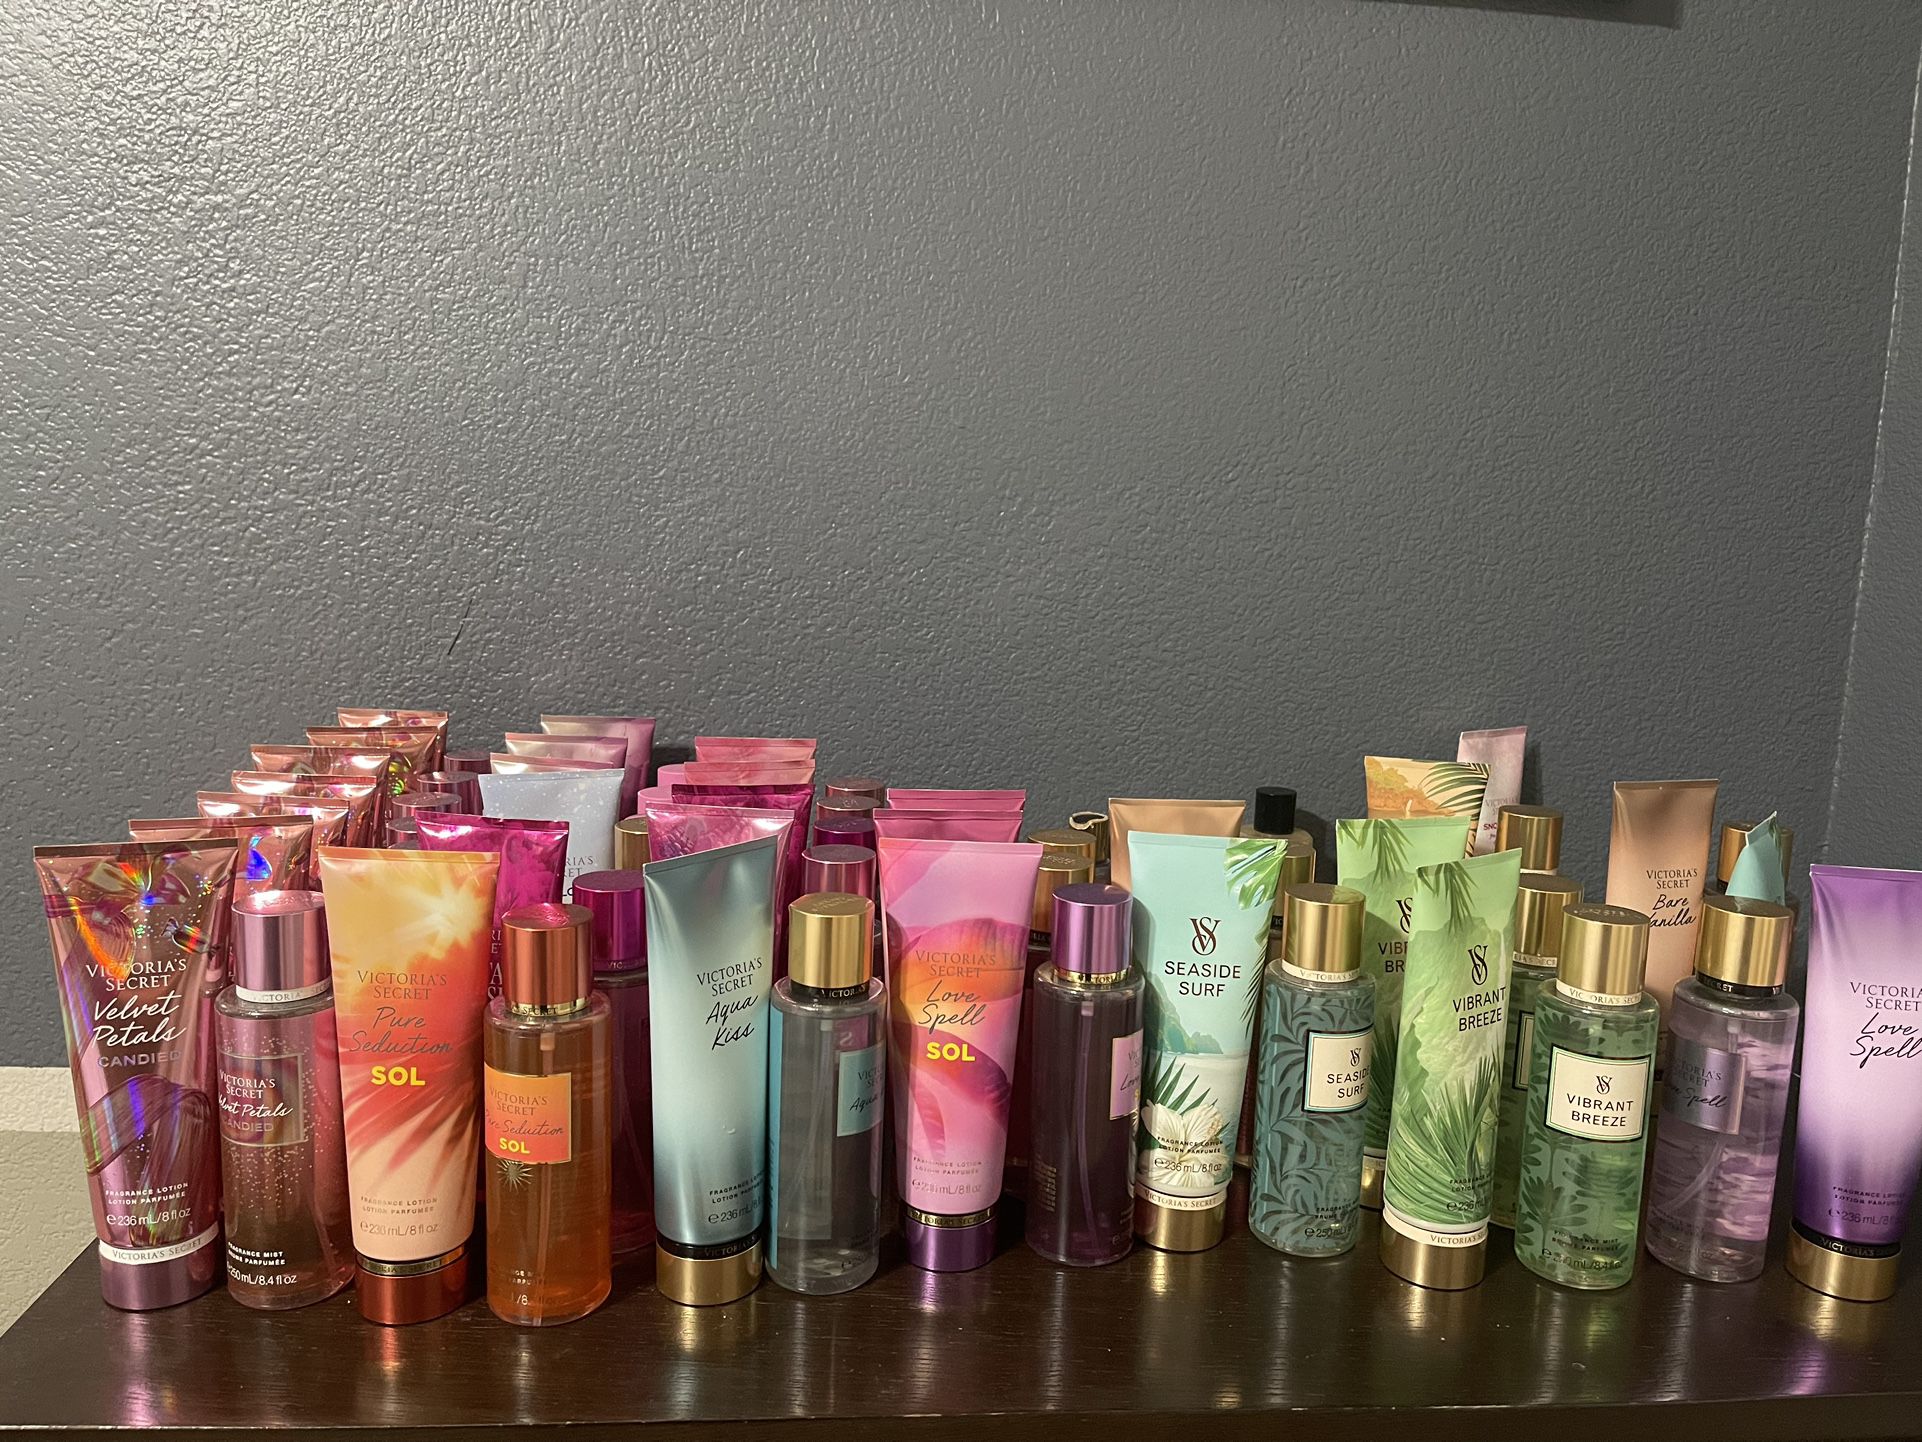 Victoria Secret 15 for 1 lotion and 1 Spray